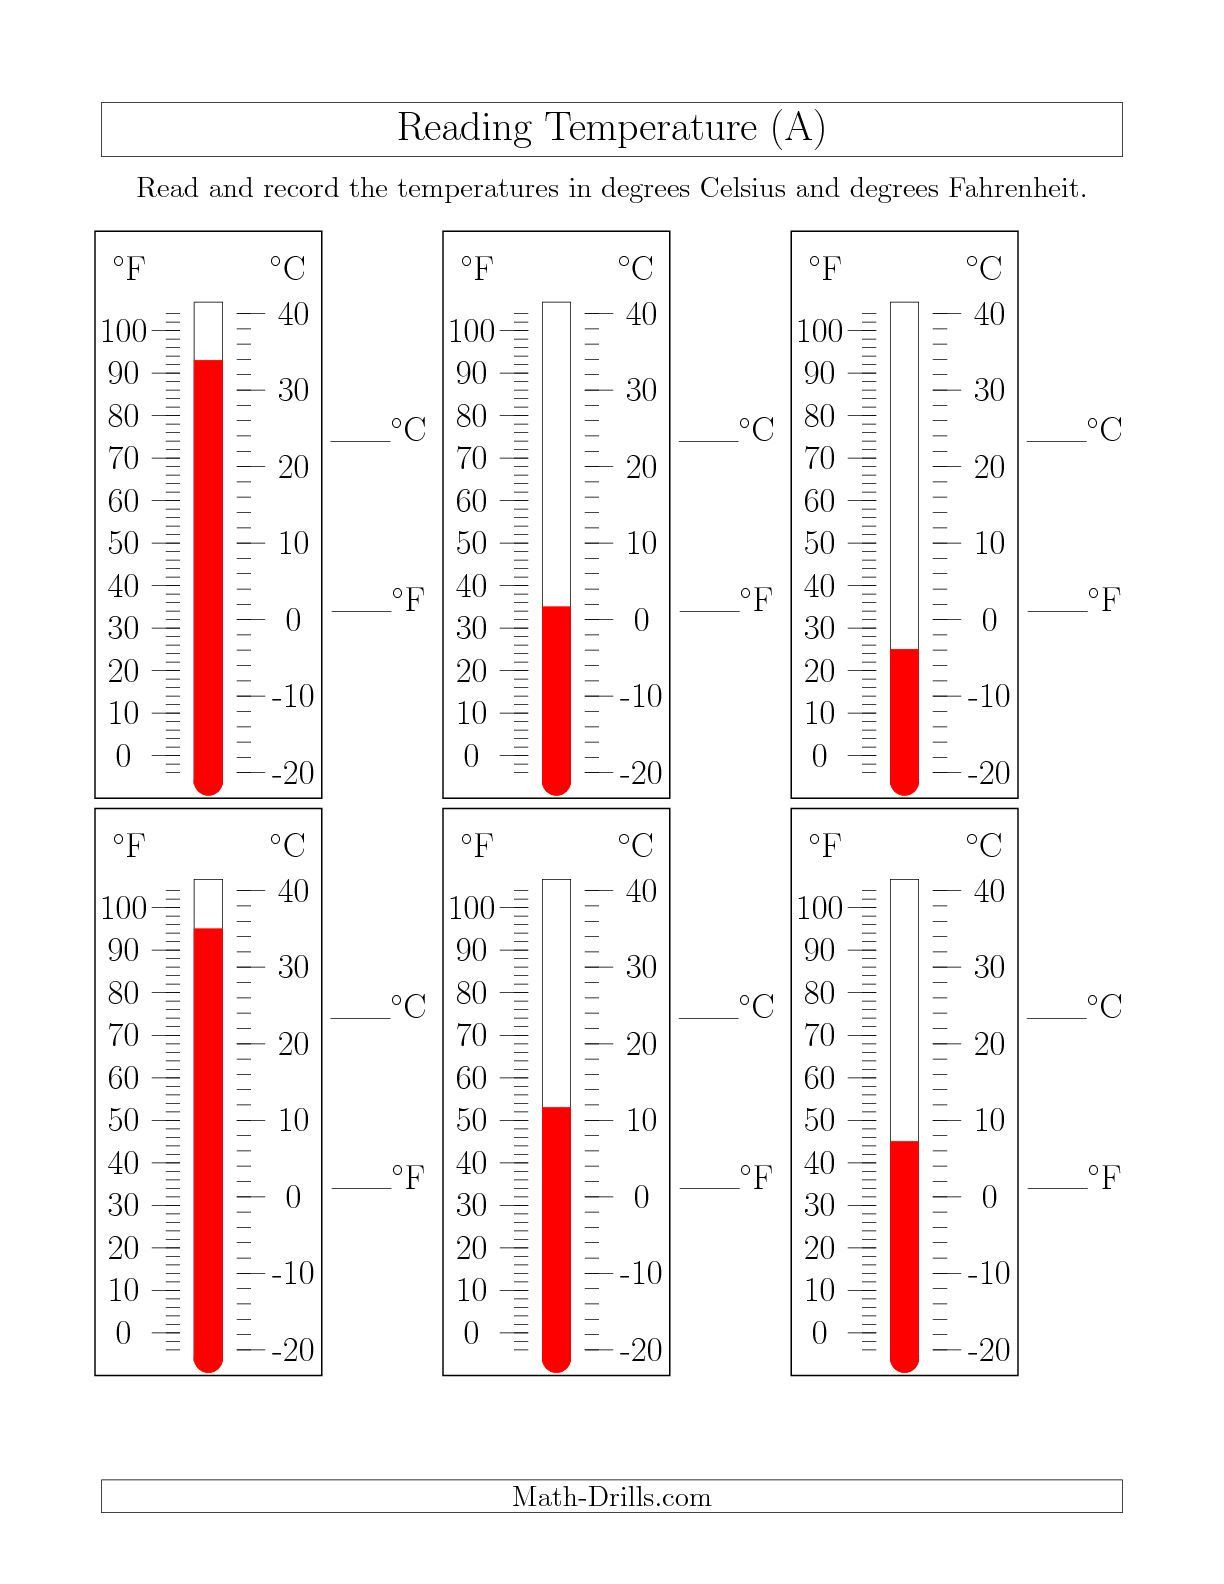 Reading A Graduated Cylinder Worksheet the Reading Temperatures From thermometers A